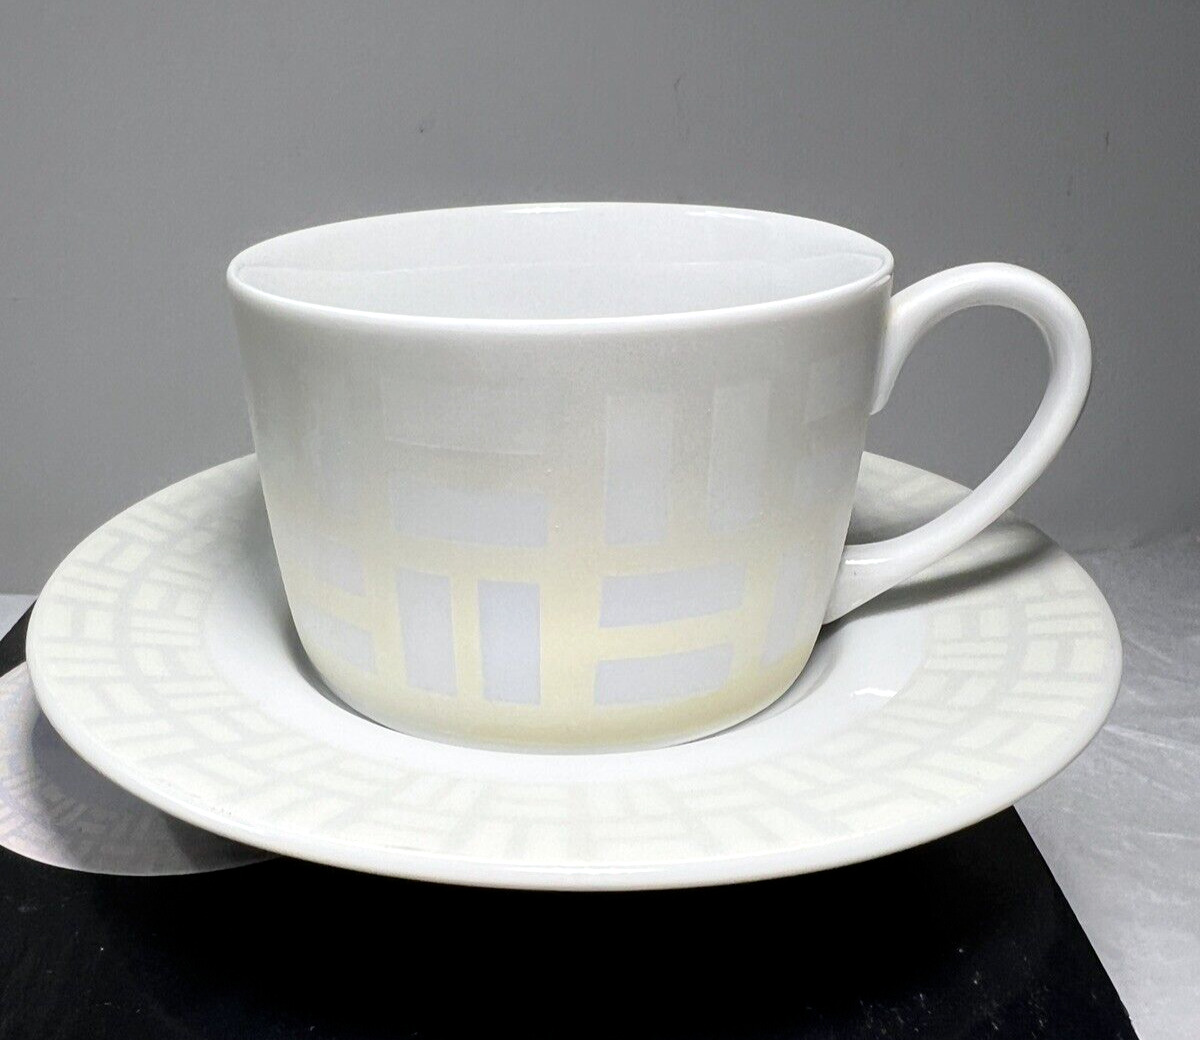 Bodum Fine Porcelain Cup and Saucer - New in Box